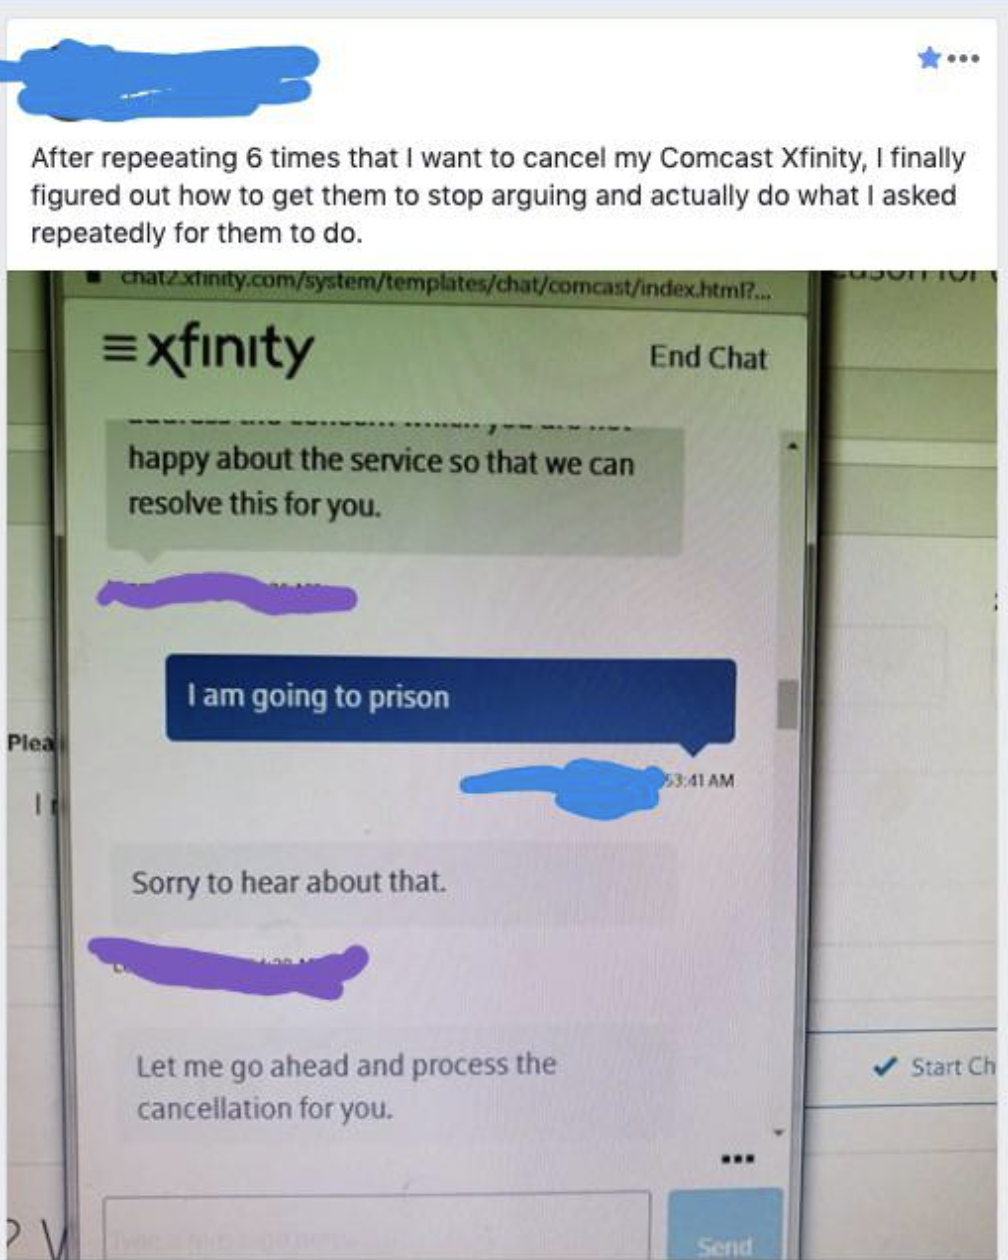 Freaky Fails and Facepalms - fter repeating 6 times that I want to cancel my Comcast Xfinity, I finally figured out how to get them to stop arguing and actually do what I asked repeatedly for them to do. xfinity happy about the service so that we can reso